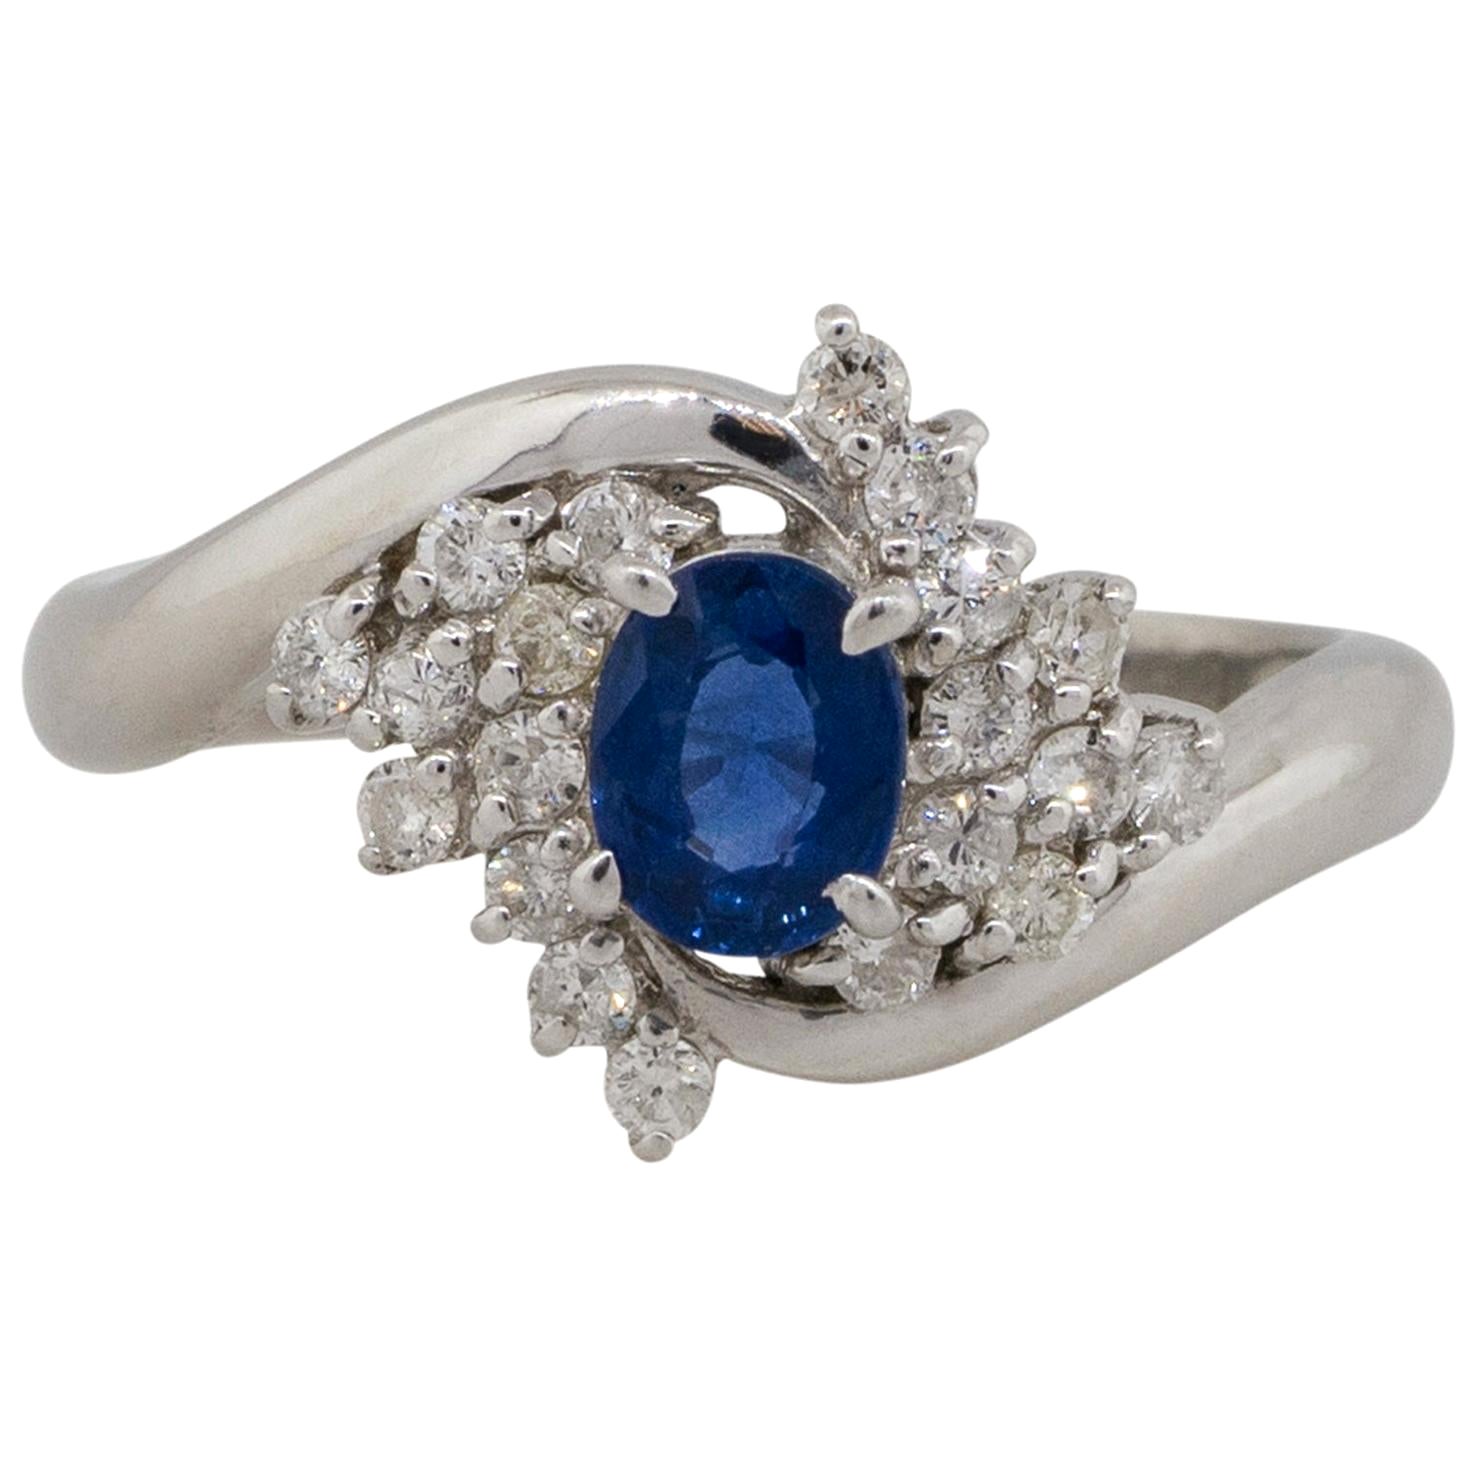 0.48 Carat Oval Cut Sapphire Diamond Cocktail Spiral Ring in Stock